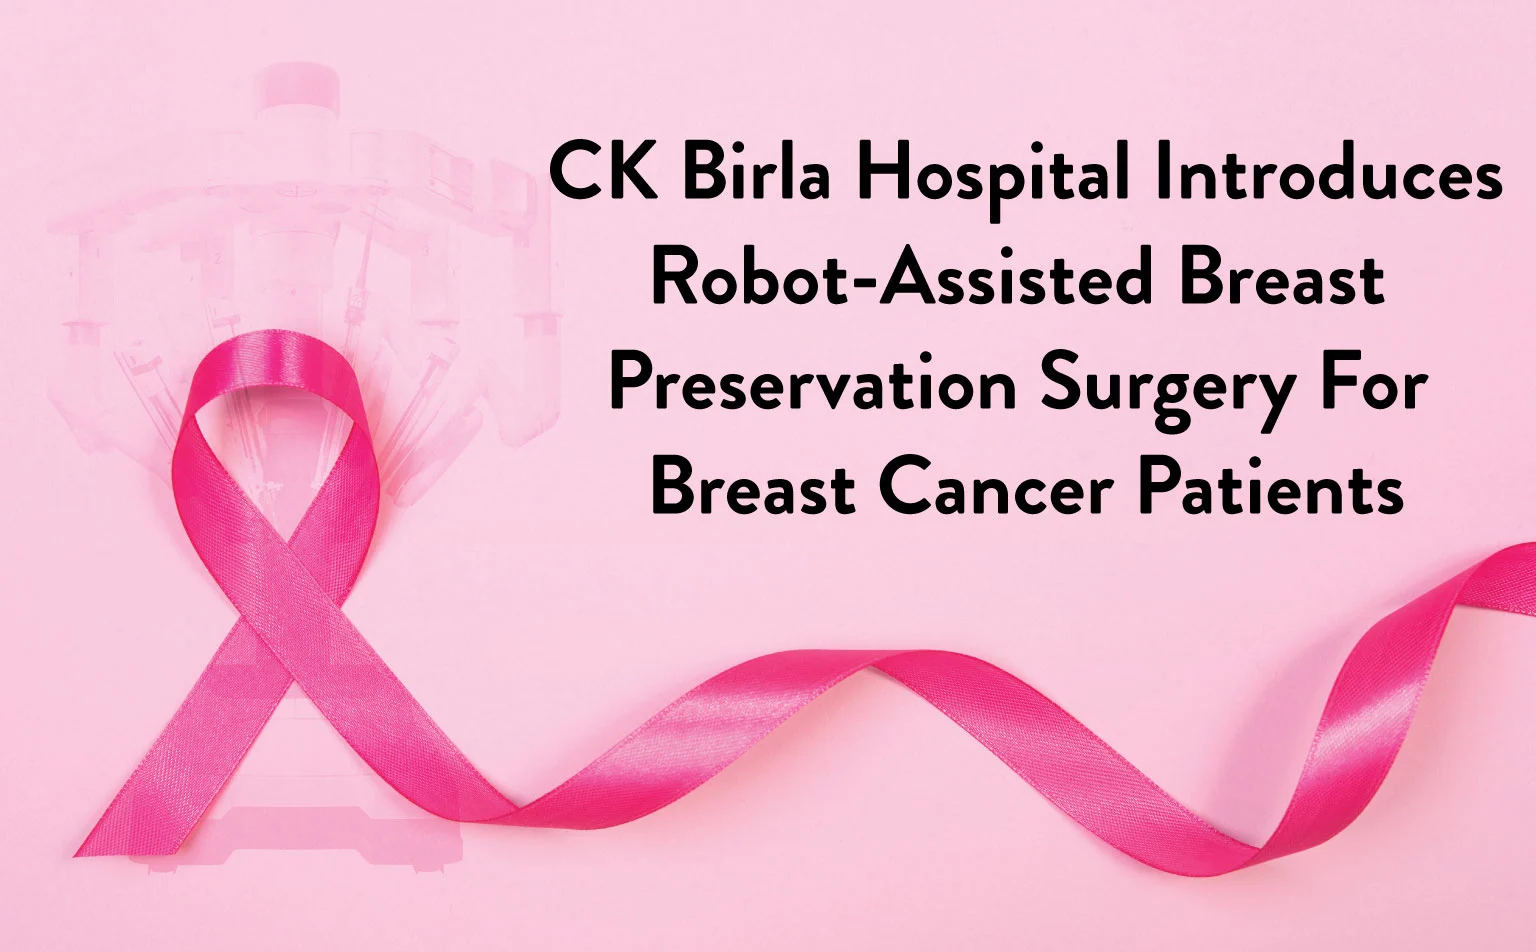 CK Birla Hospital Launches Robot-Assisted Breast Preservation Surgery